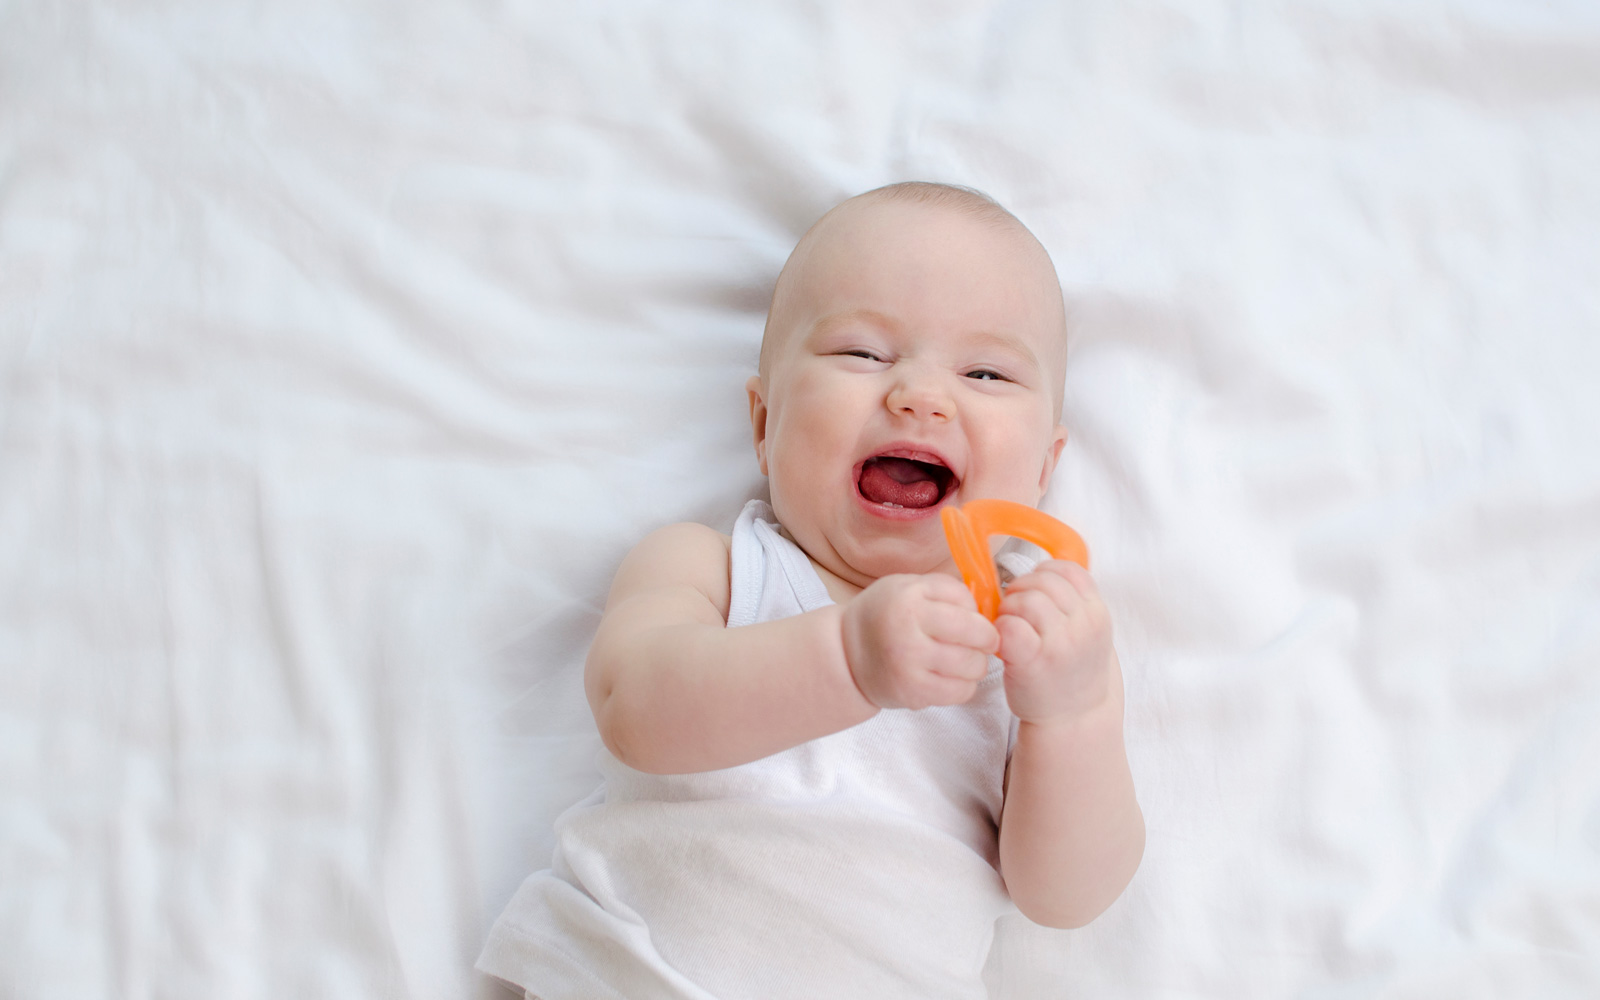 Baby Laughing with Toy